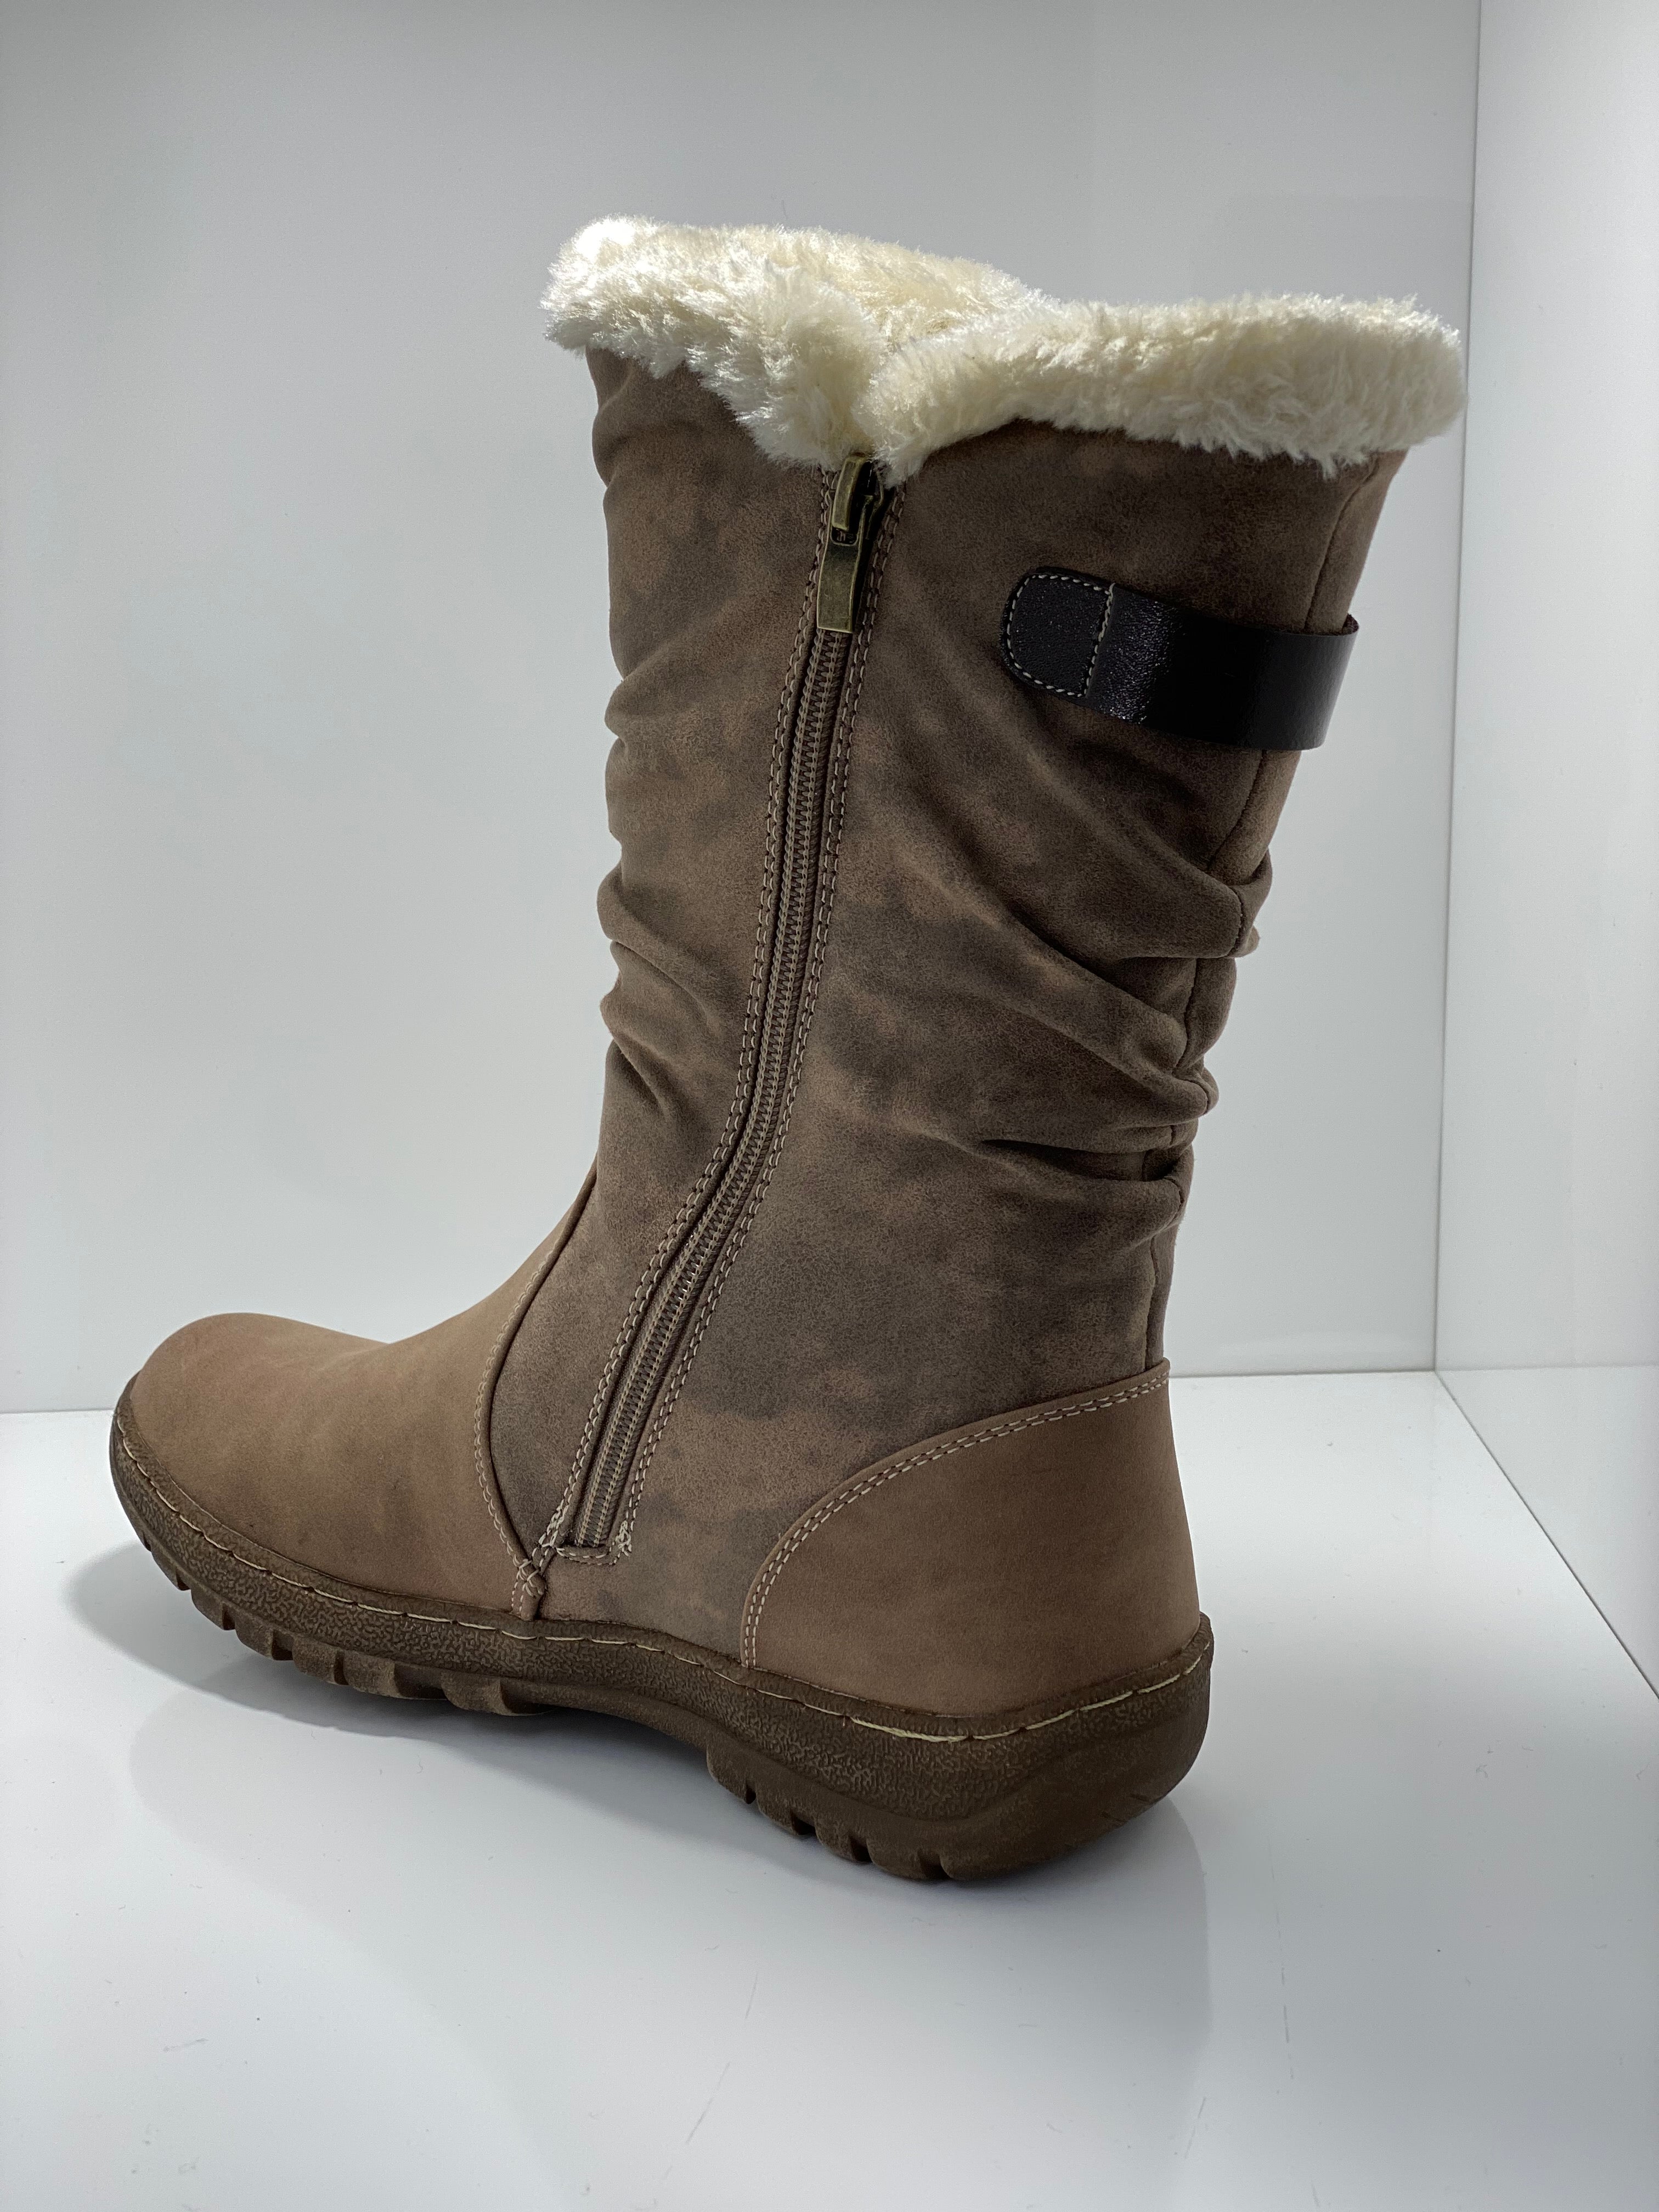 Goose Fur Lined Boot